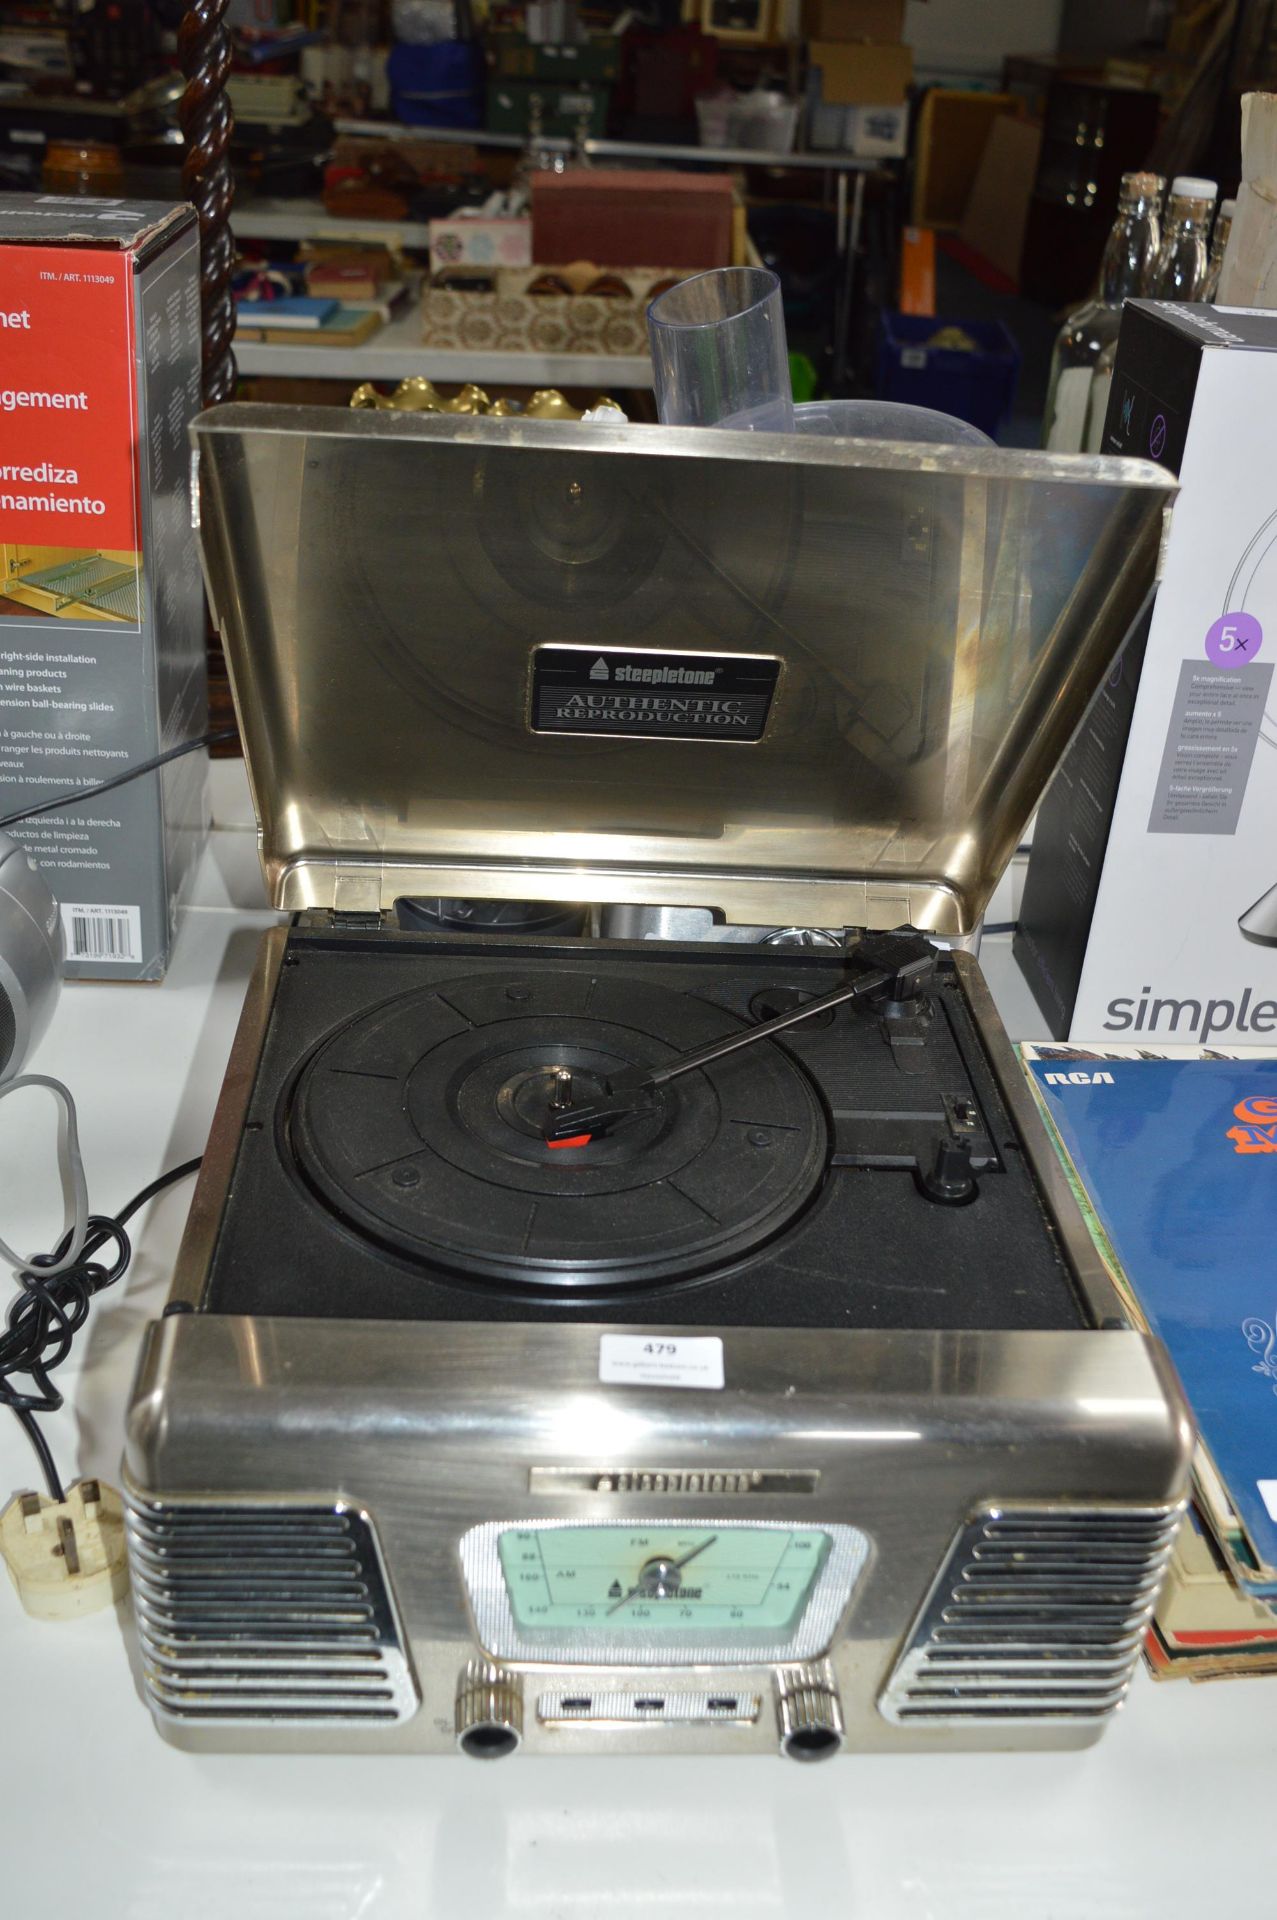 Steepletone Reproduction Record Player